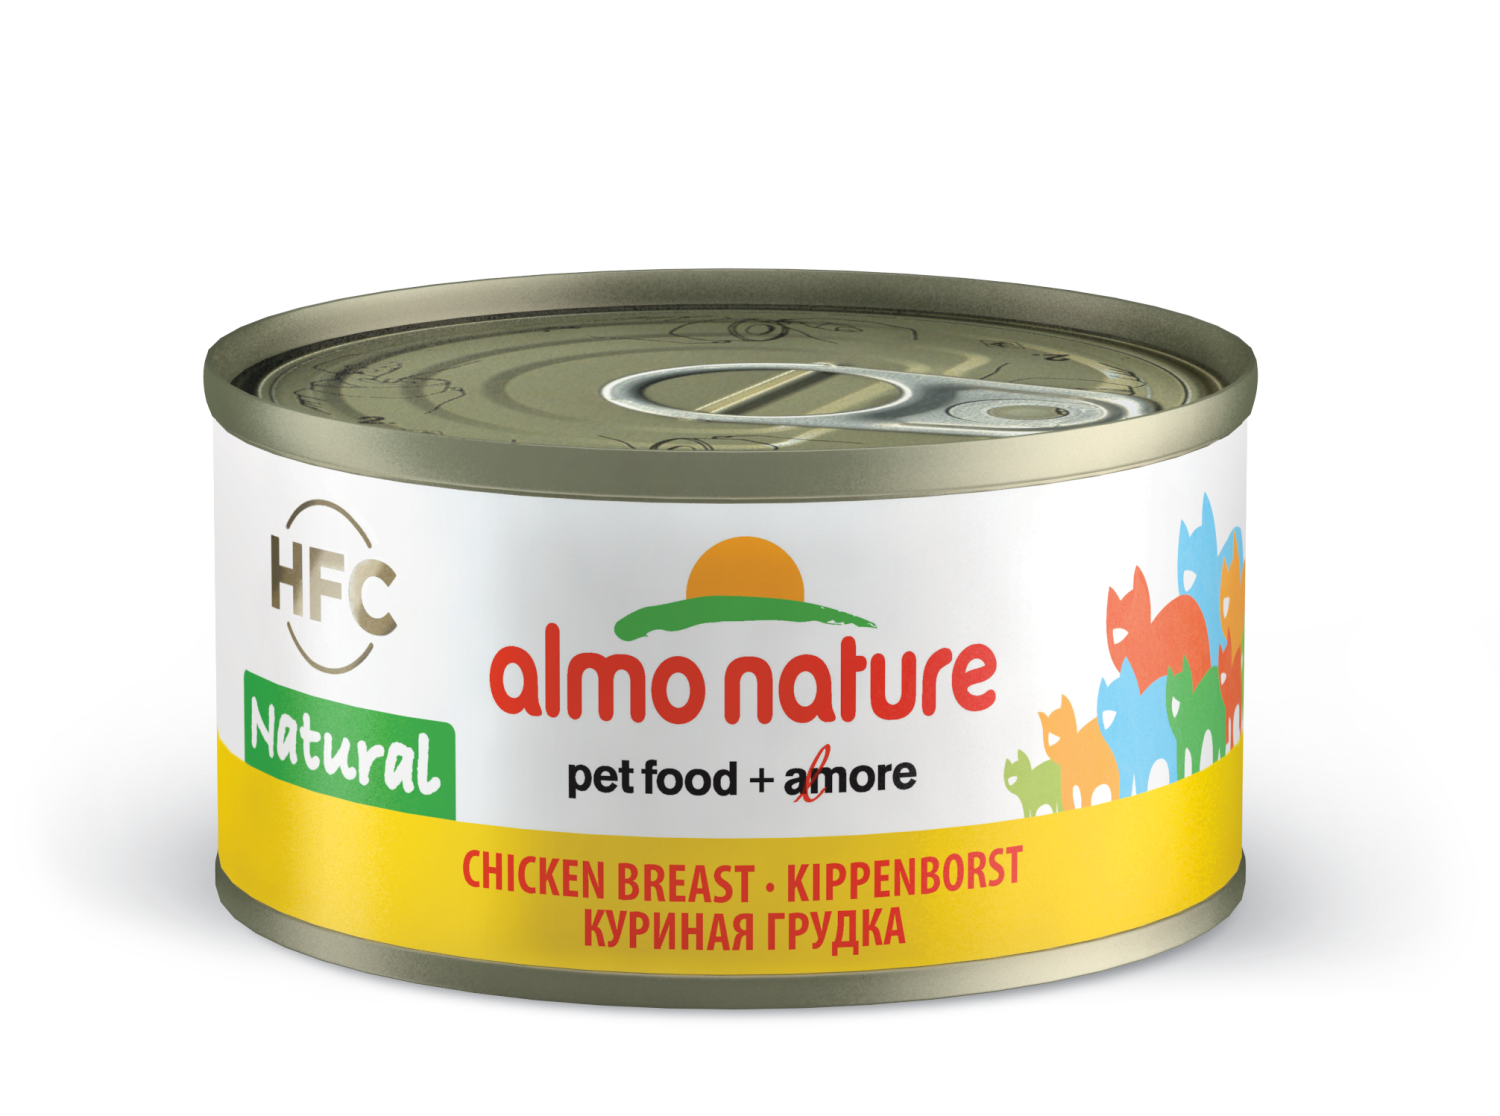 Kylling Bryst 70gr, Almo Nature (24)